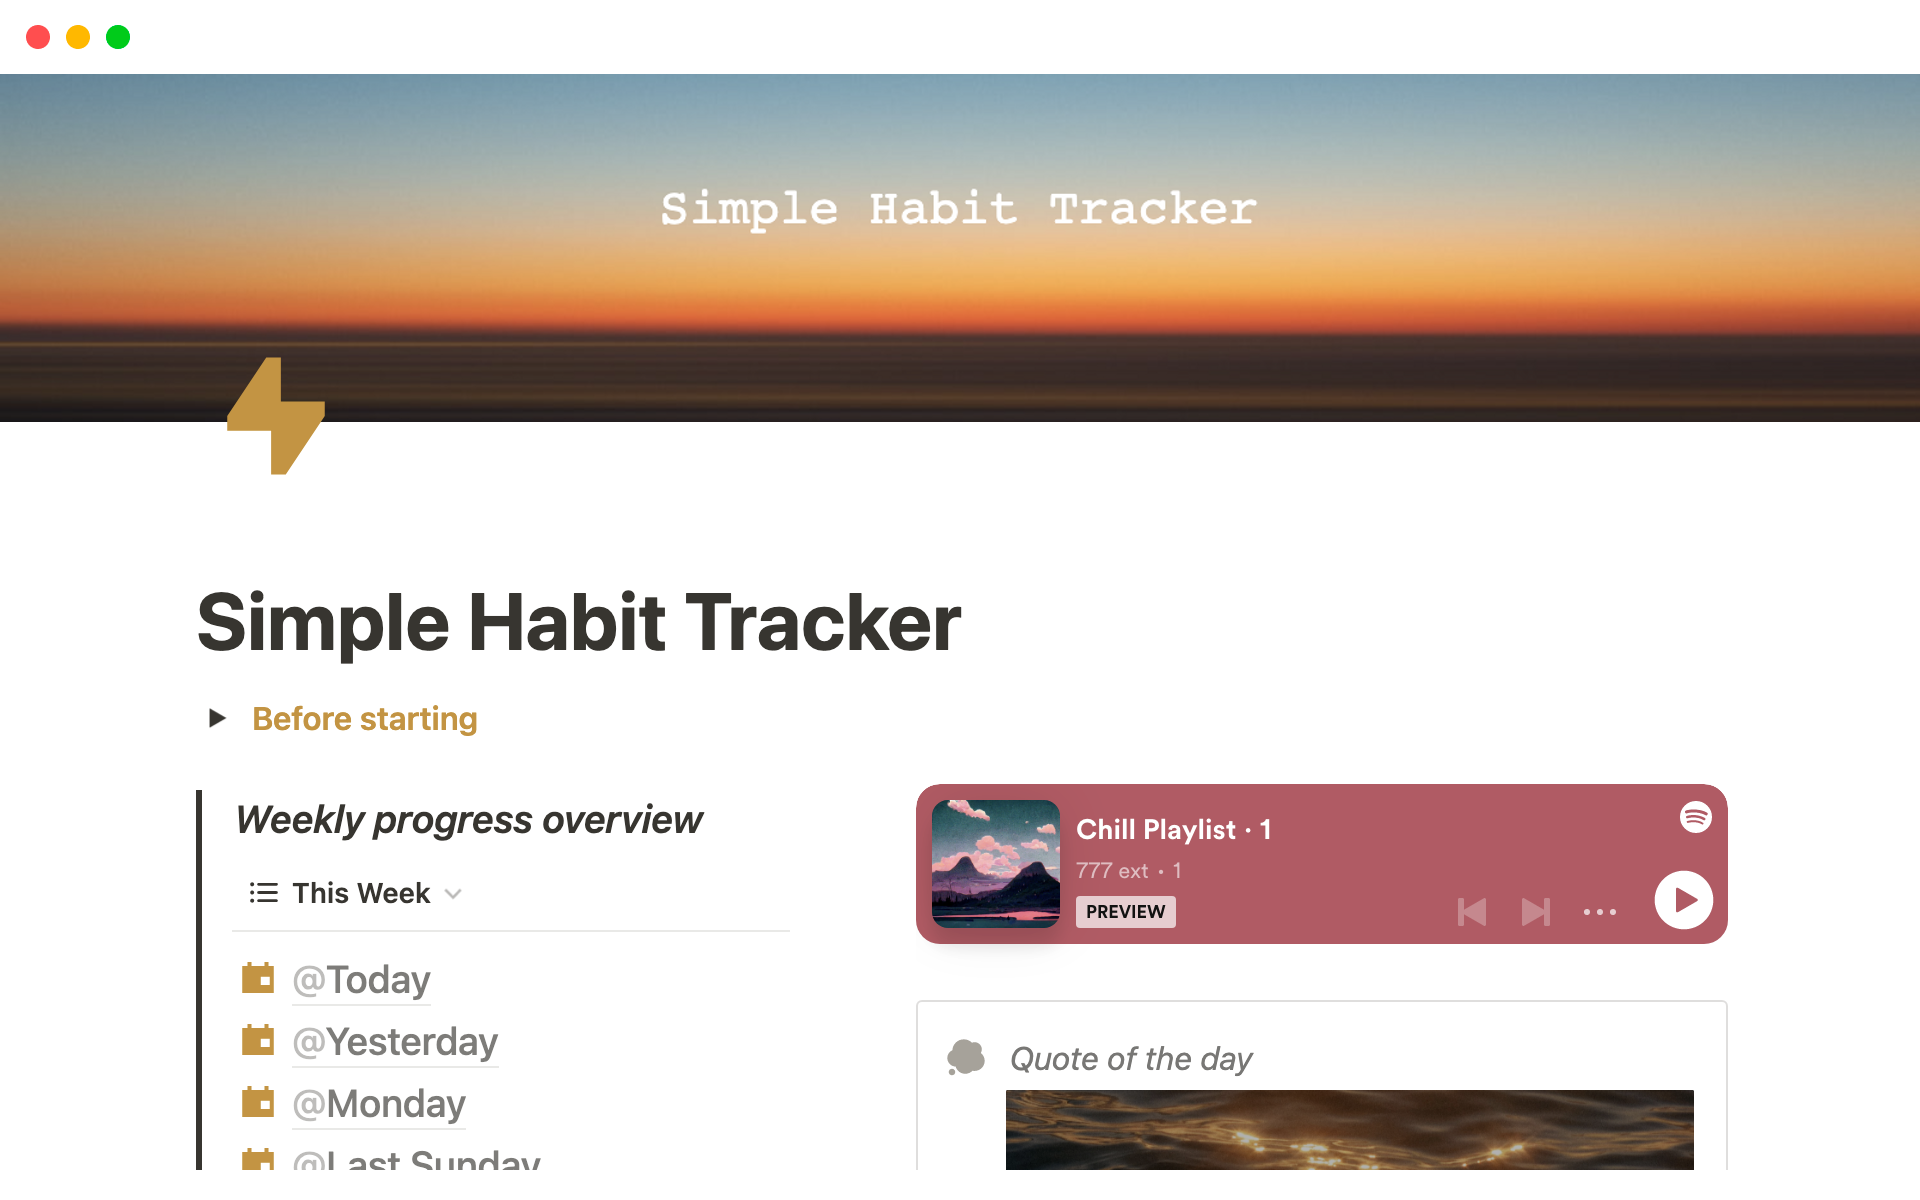 This intuitive Habit Tracker will make tracking your habits a breeze, so you can focus on making progress and achieving your goals.